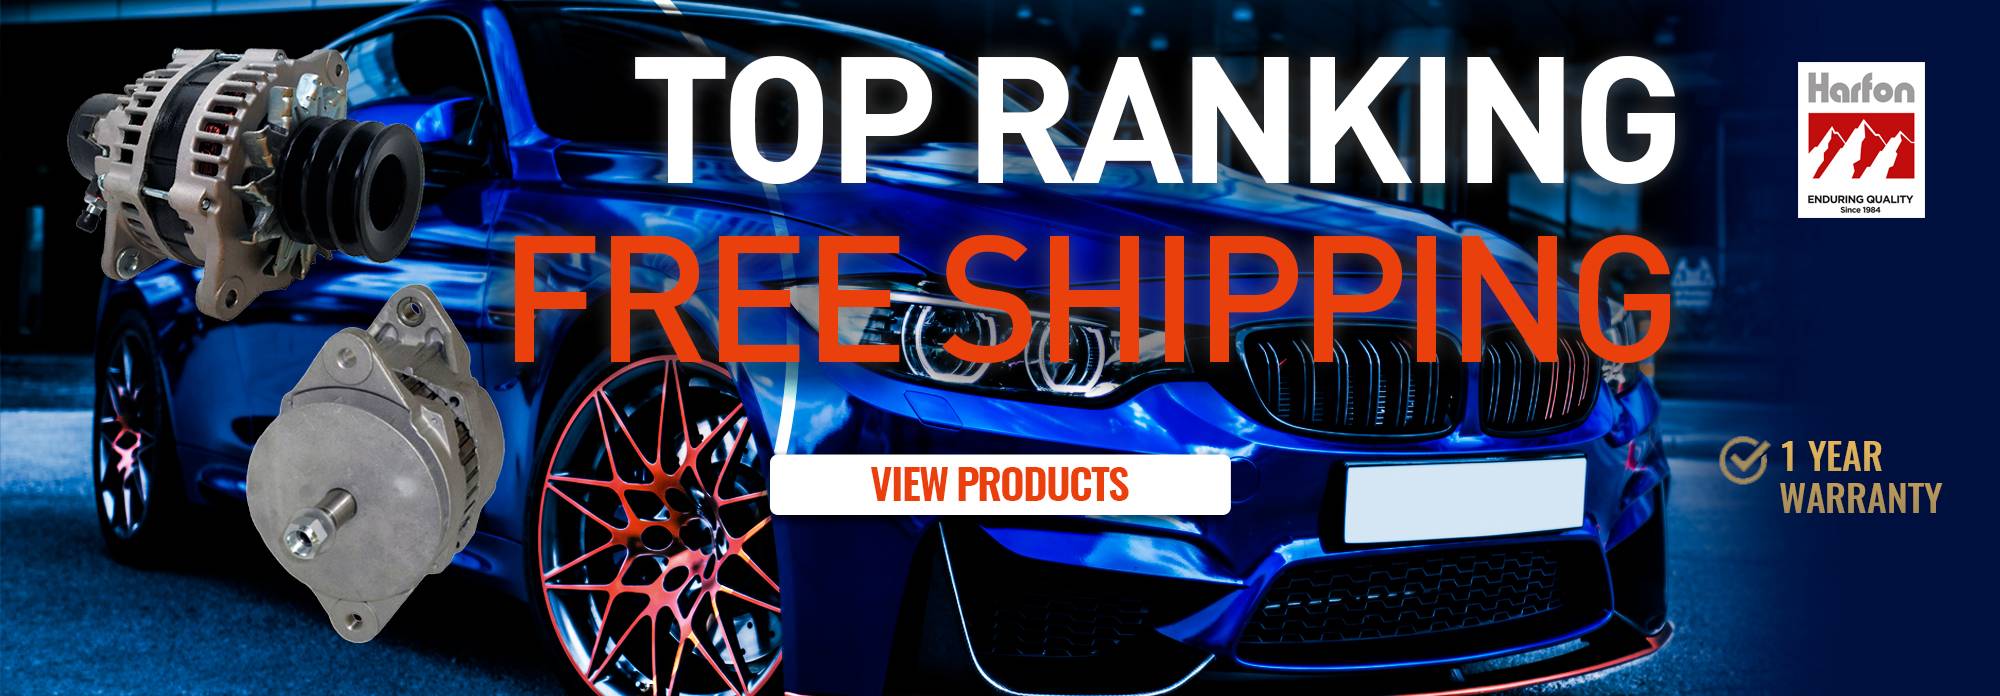 Top Ranking Products